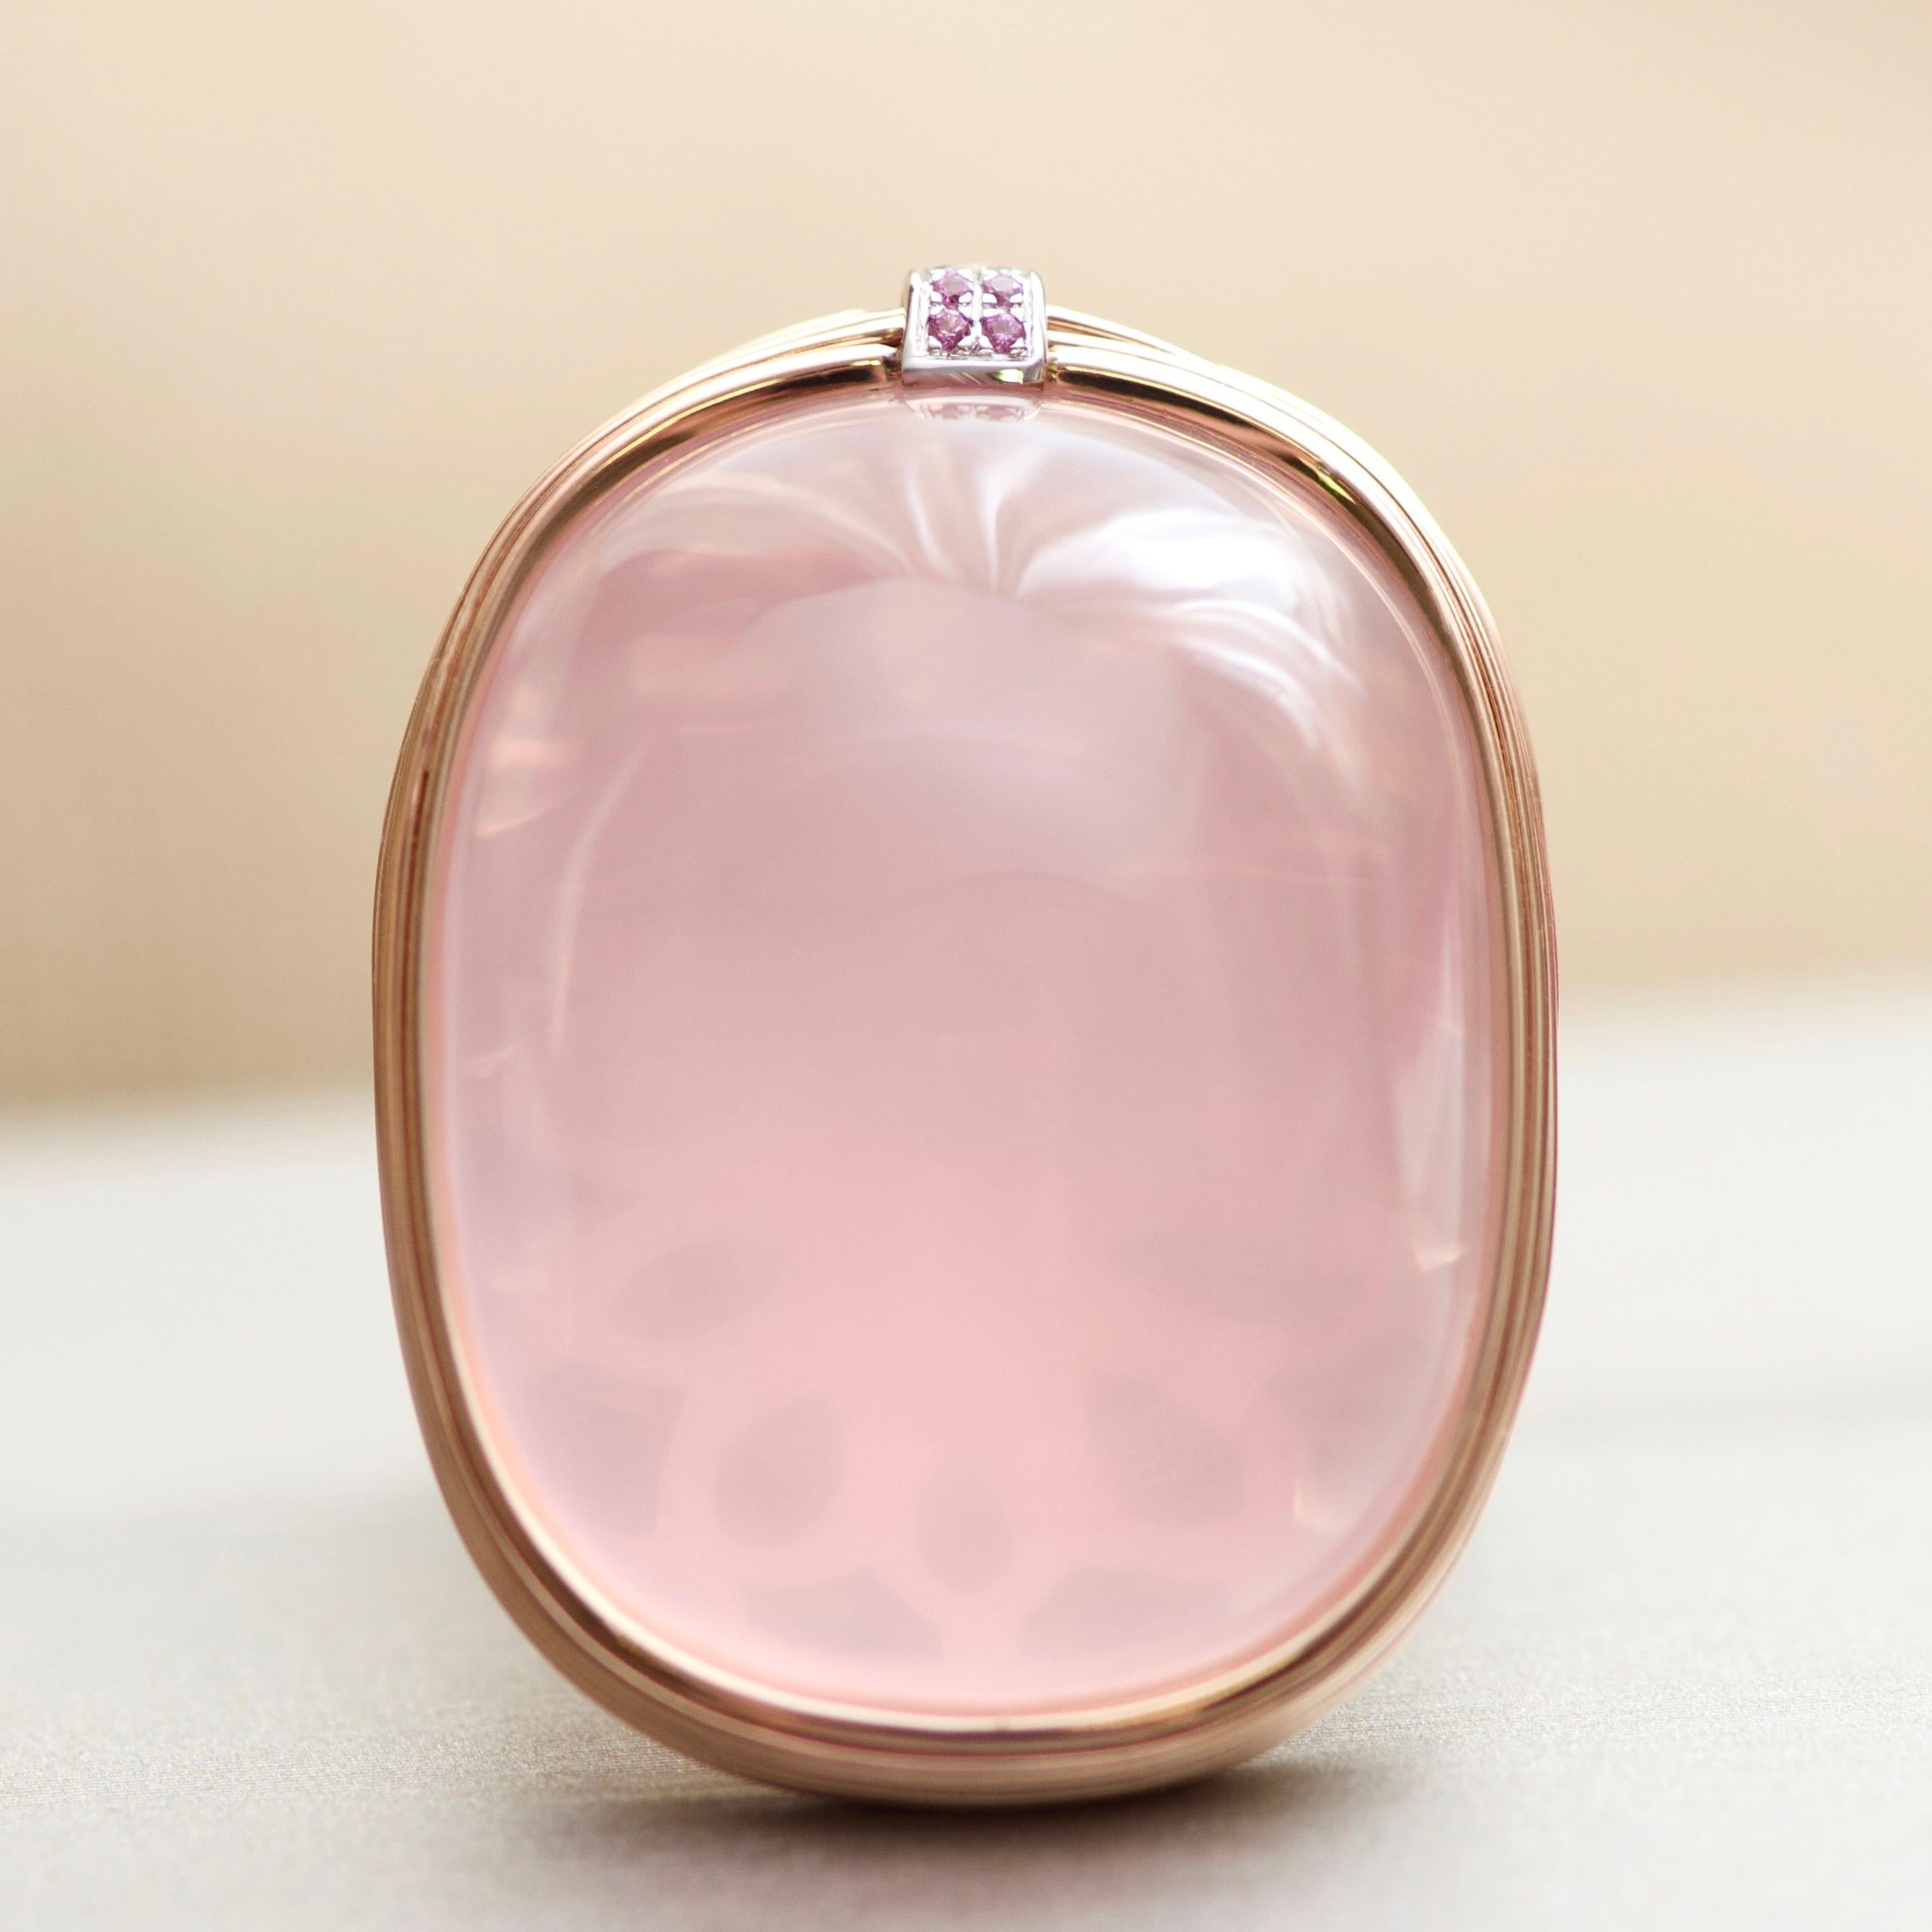 If you like nude pink colors we have something special for you.
Rose quartz from Madagascar is looking like a candy in a frame of rose gold.
We love unusual techniques in our jewelry very much. 
In this ring we used absolutely unusual technology -